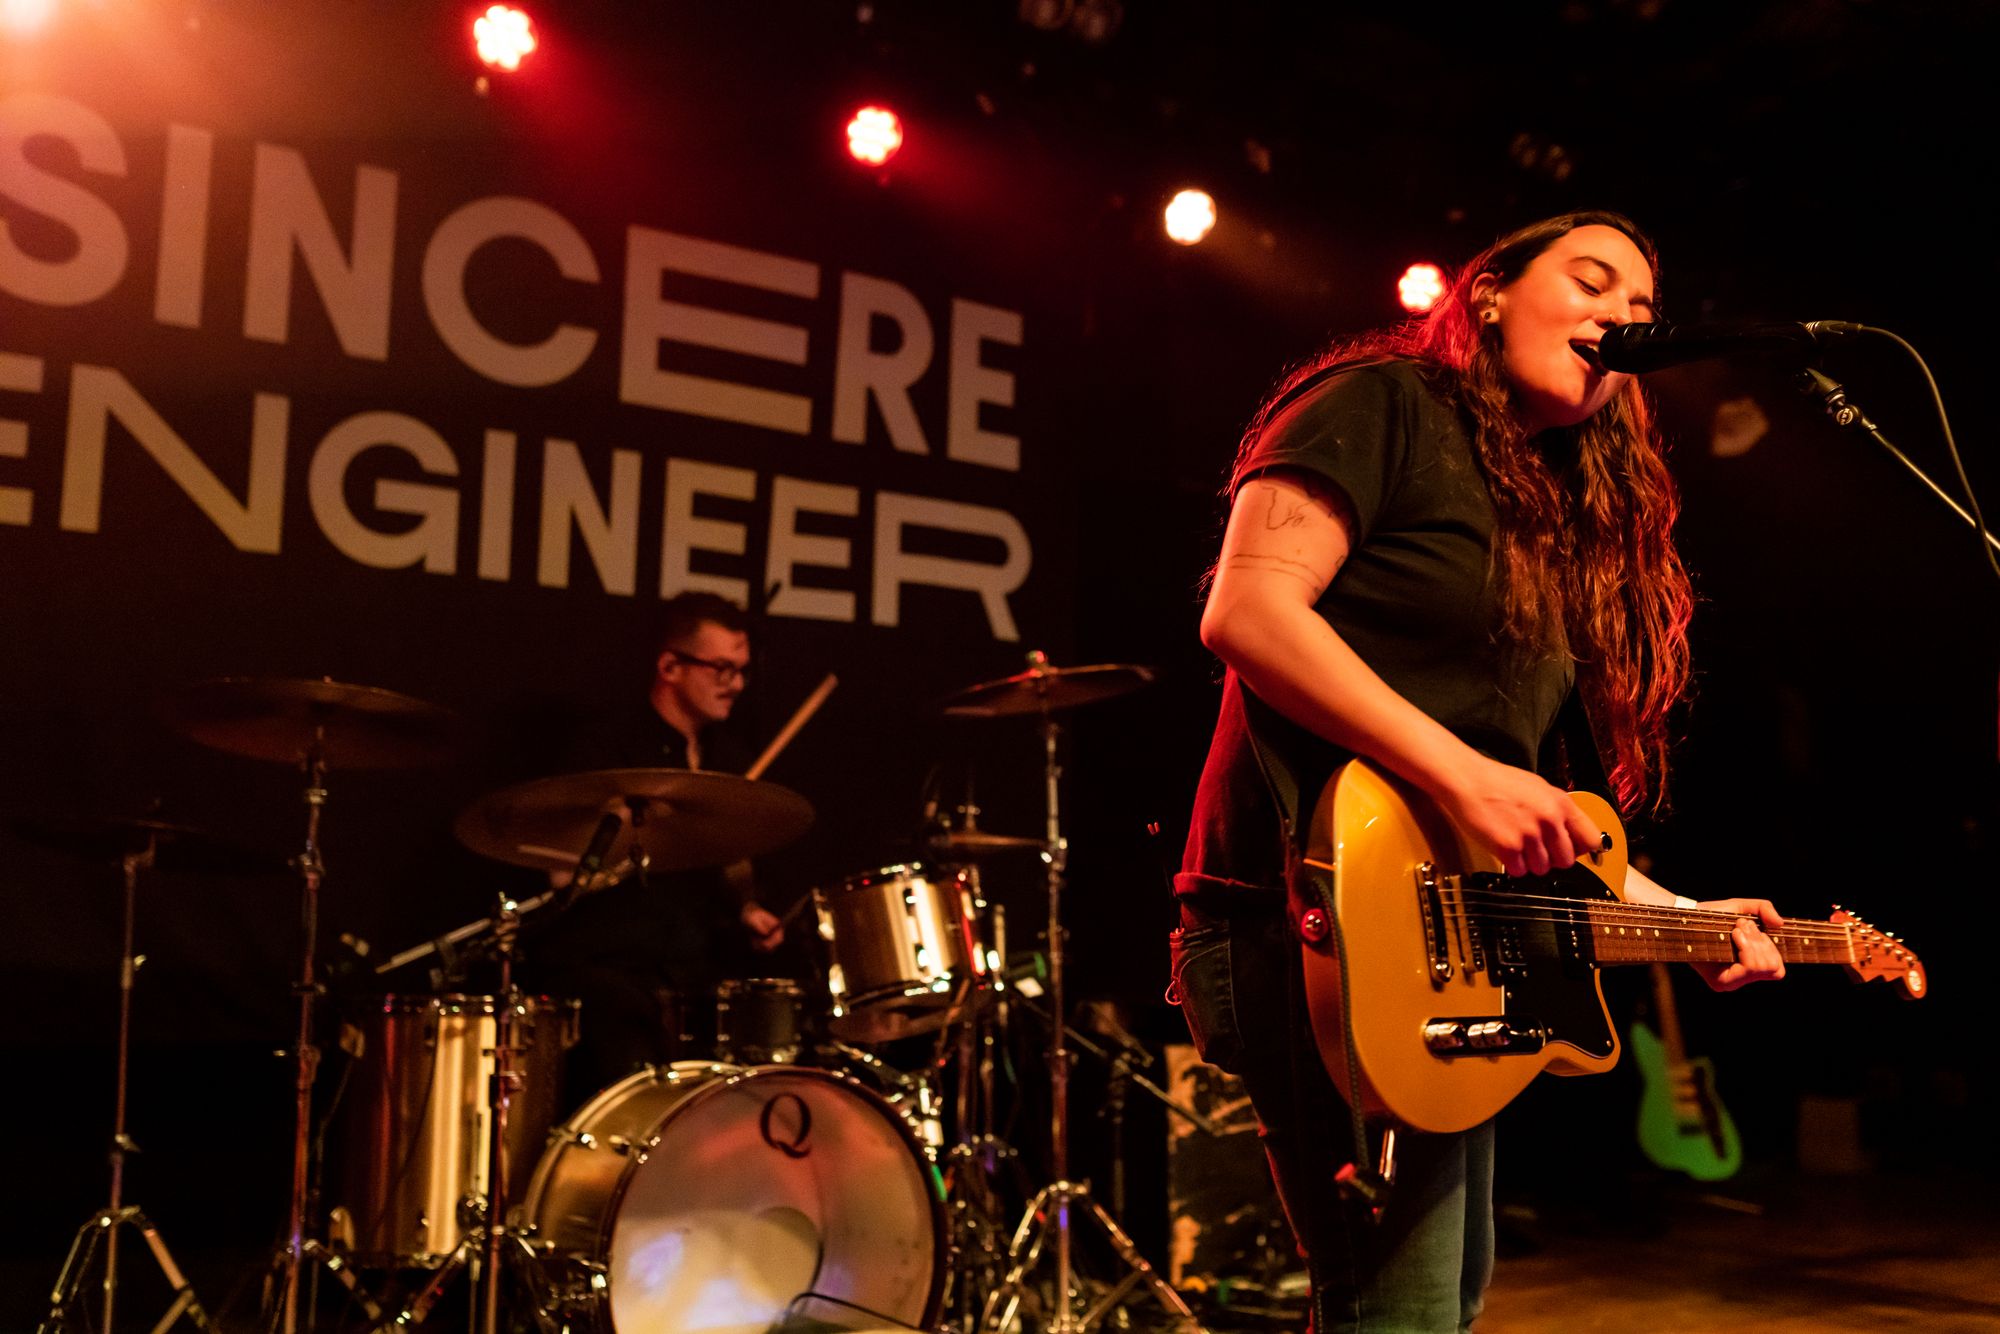 Sincere Engineer Shows There's No Place Like Home at Chicago's Bottom Lounge